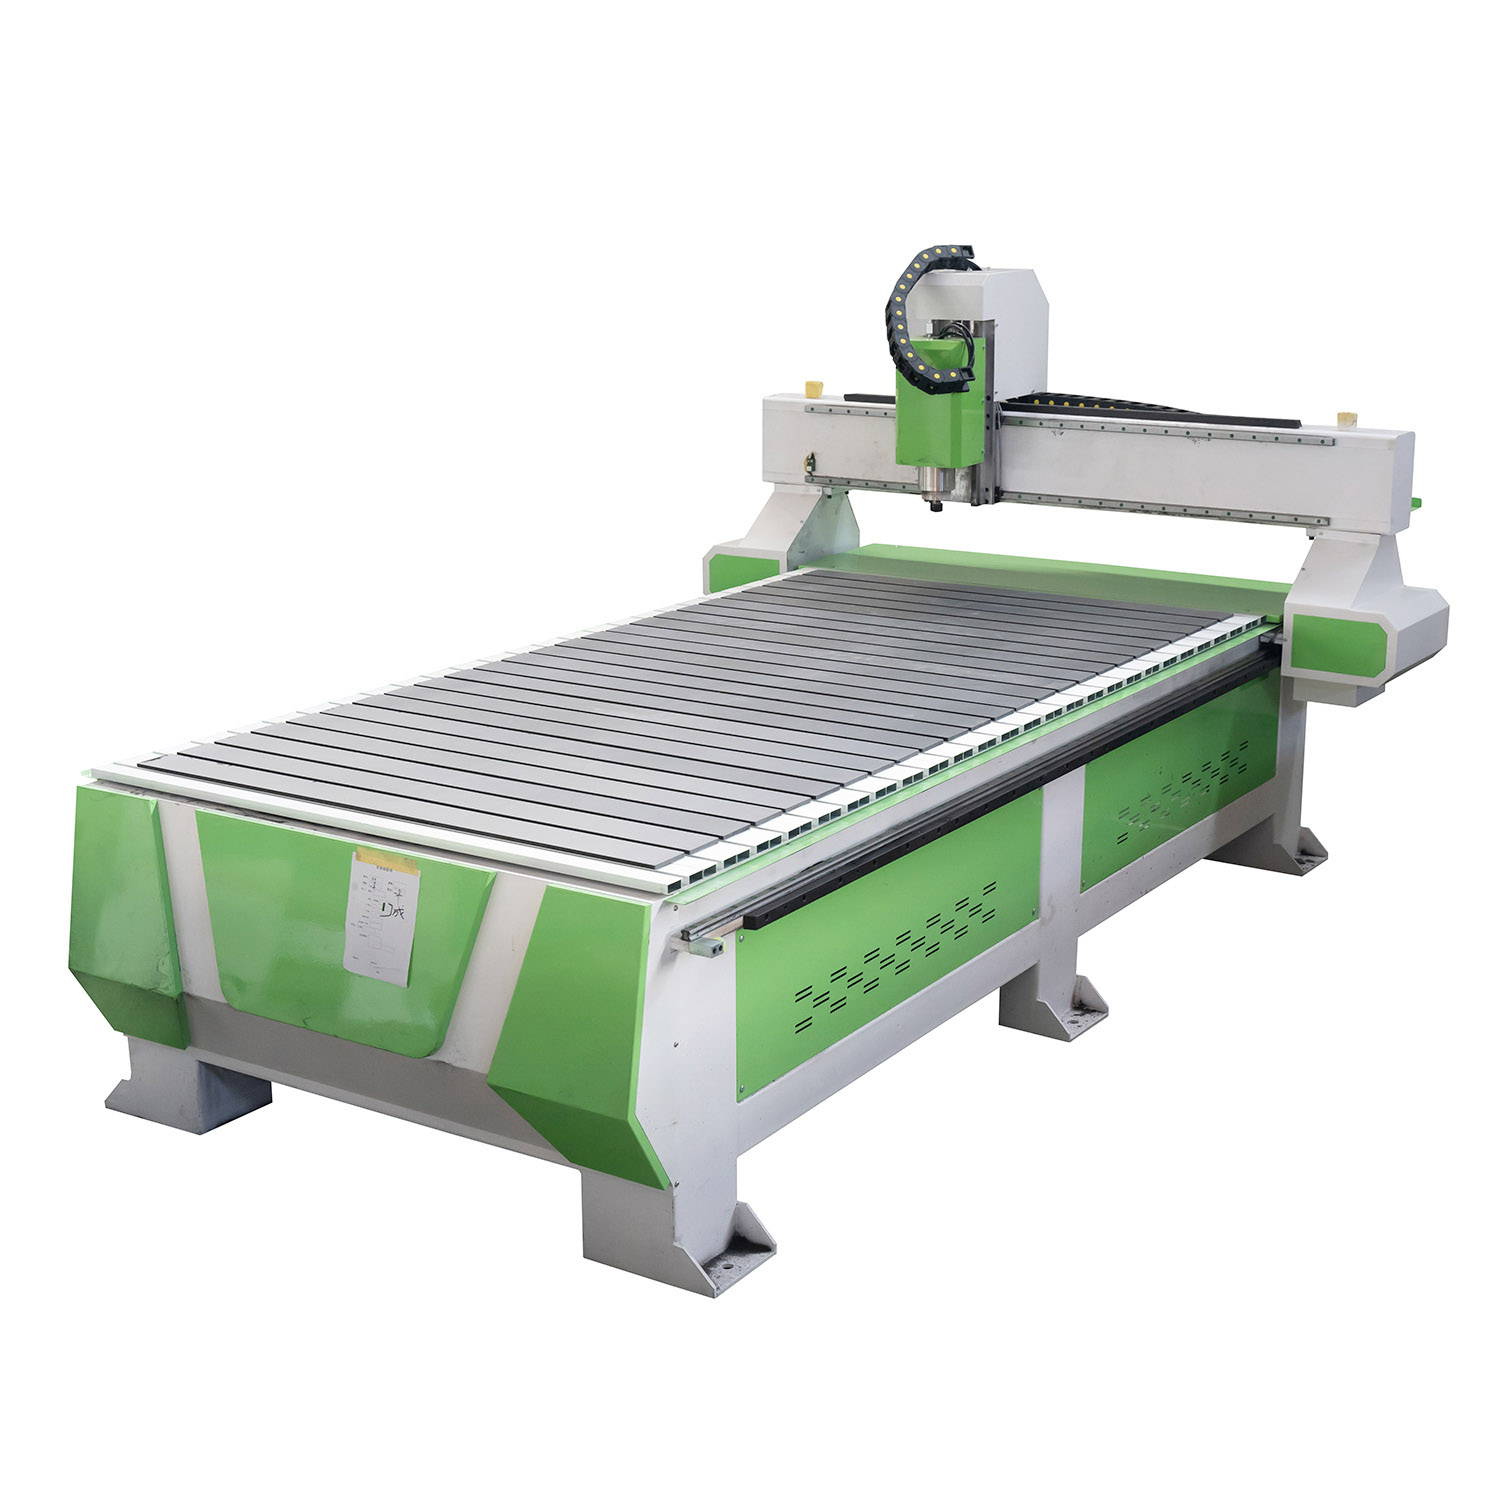 OEM/ODM Factory Old Cnc Router Machine - 3 Axis CNC Router Wood Carving Machine for MDF Kitchen Cabinet Furniture – Apex